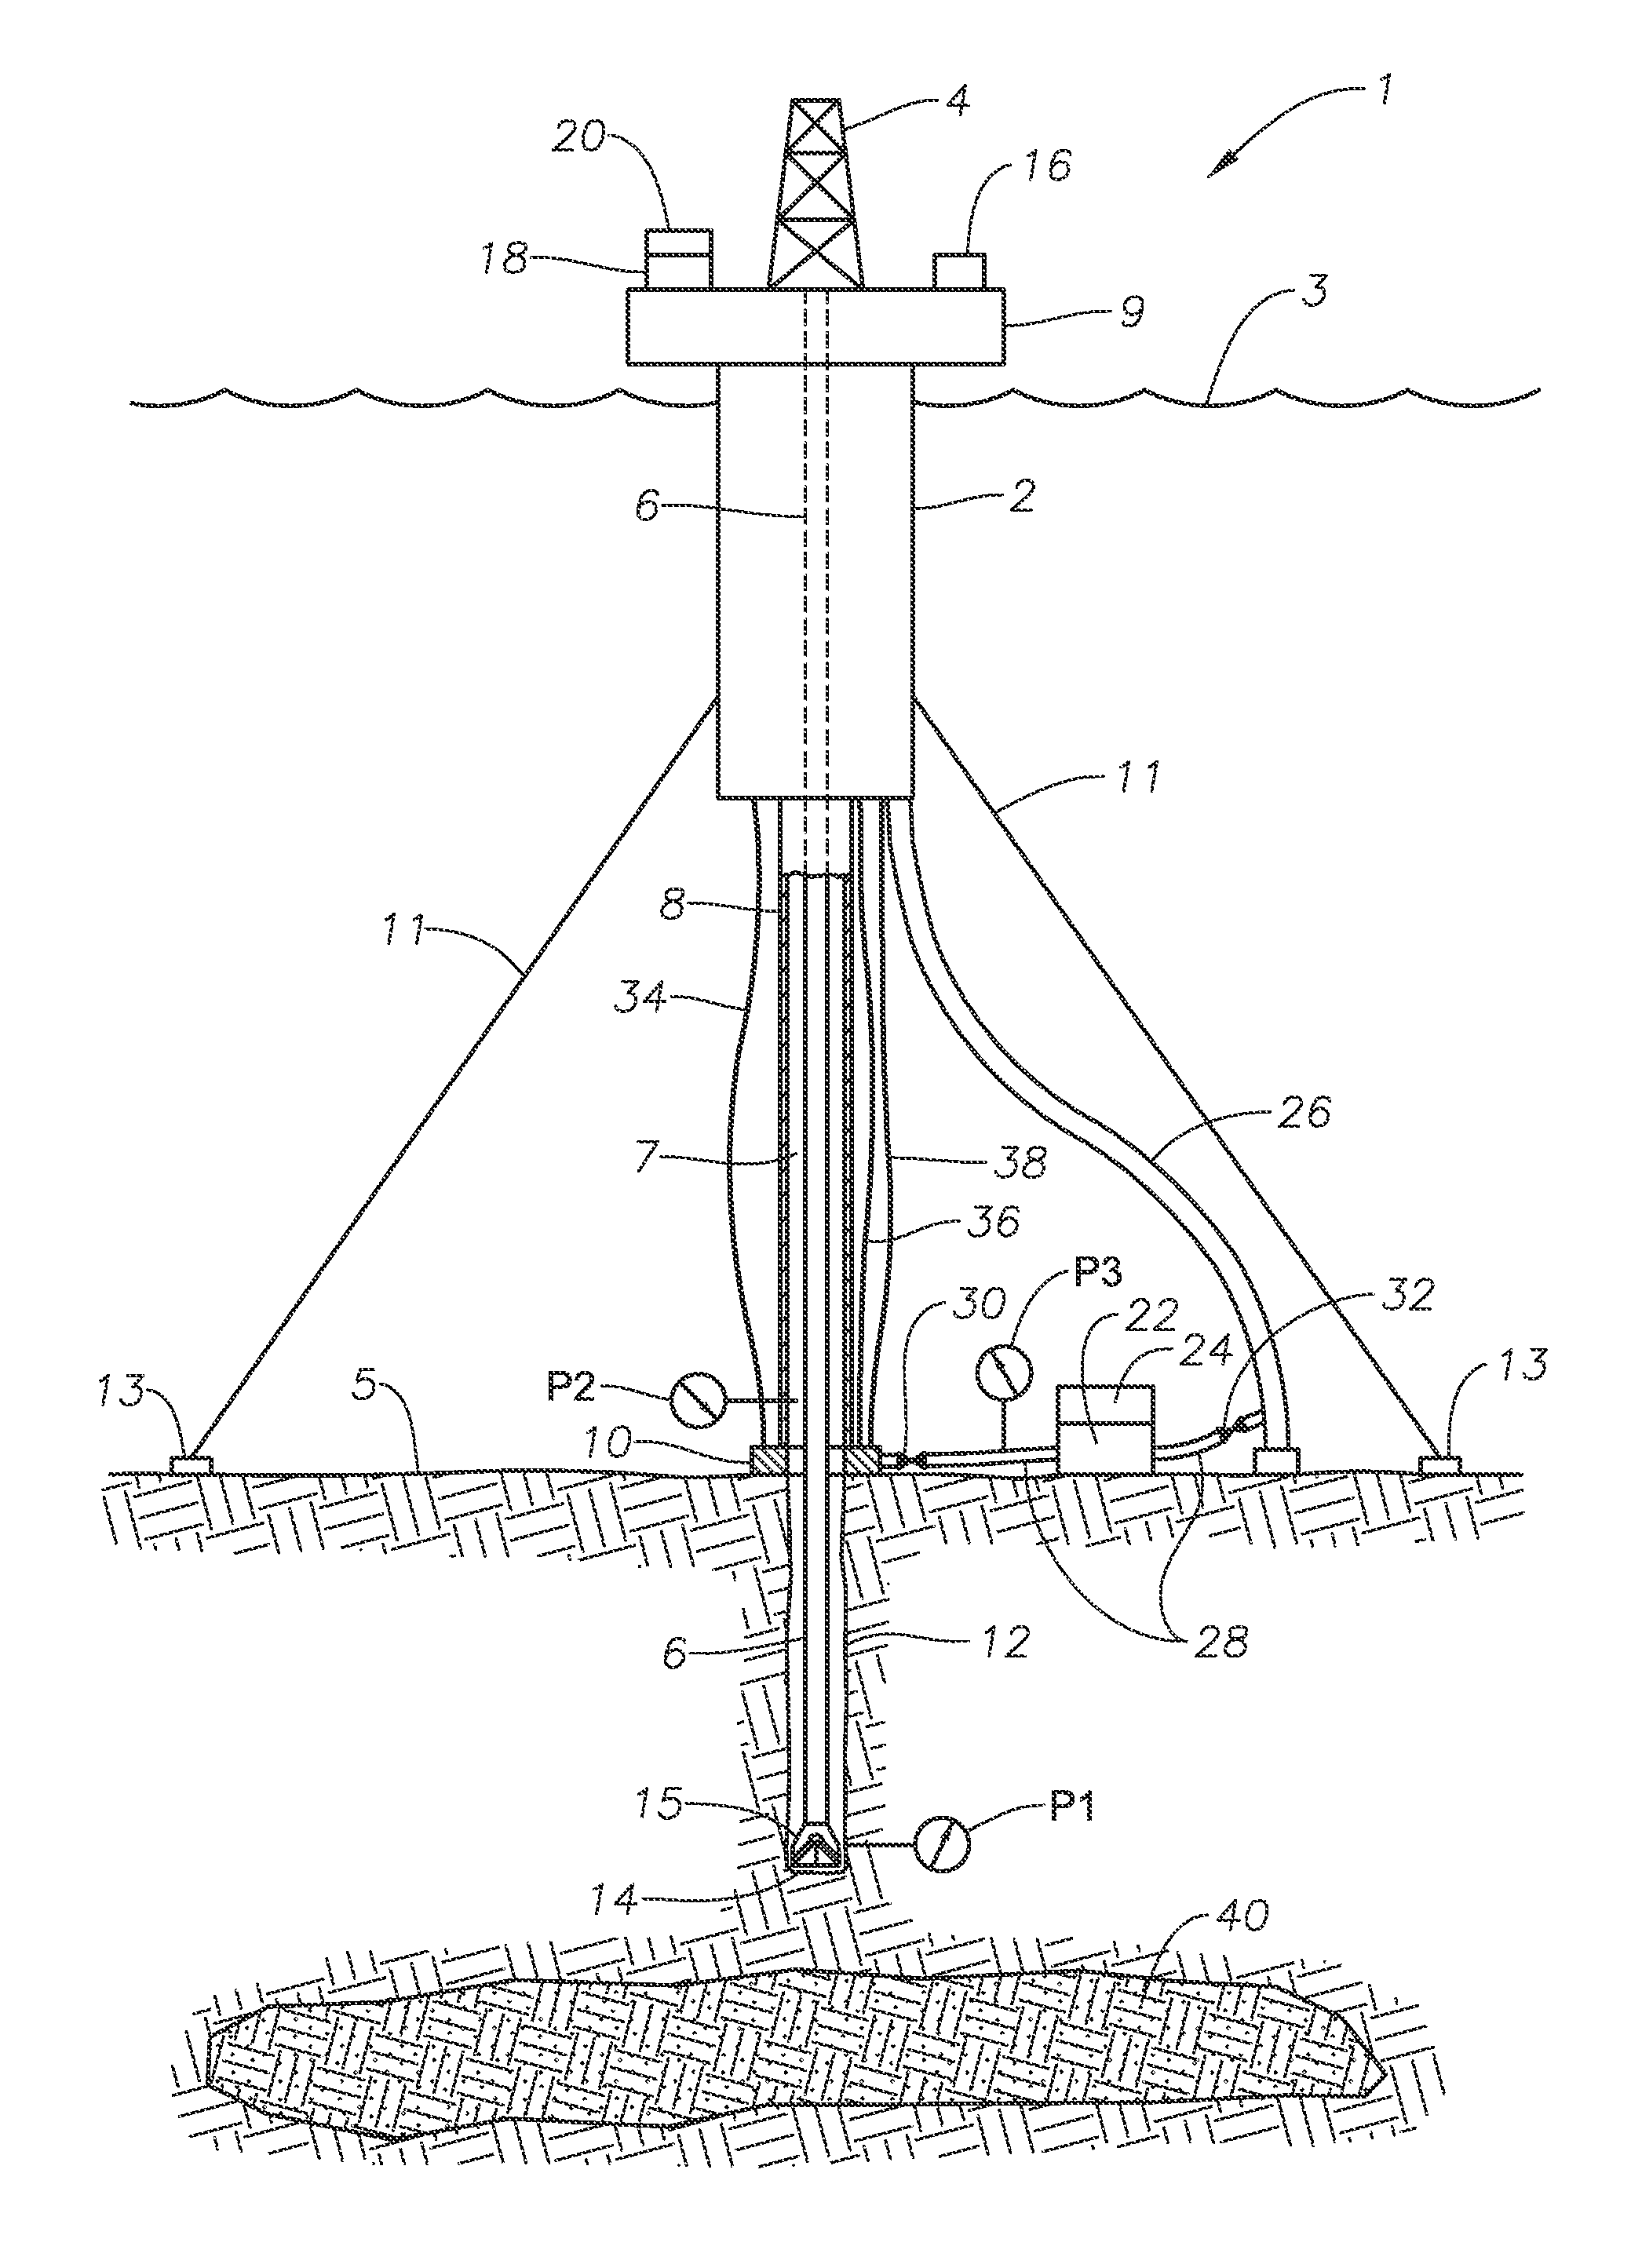 Systems and methods for circulating out a well bore influx in a dual gradient environment